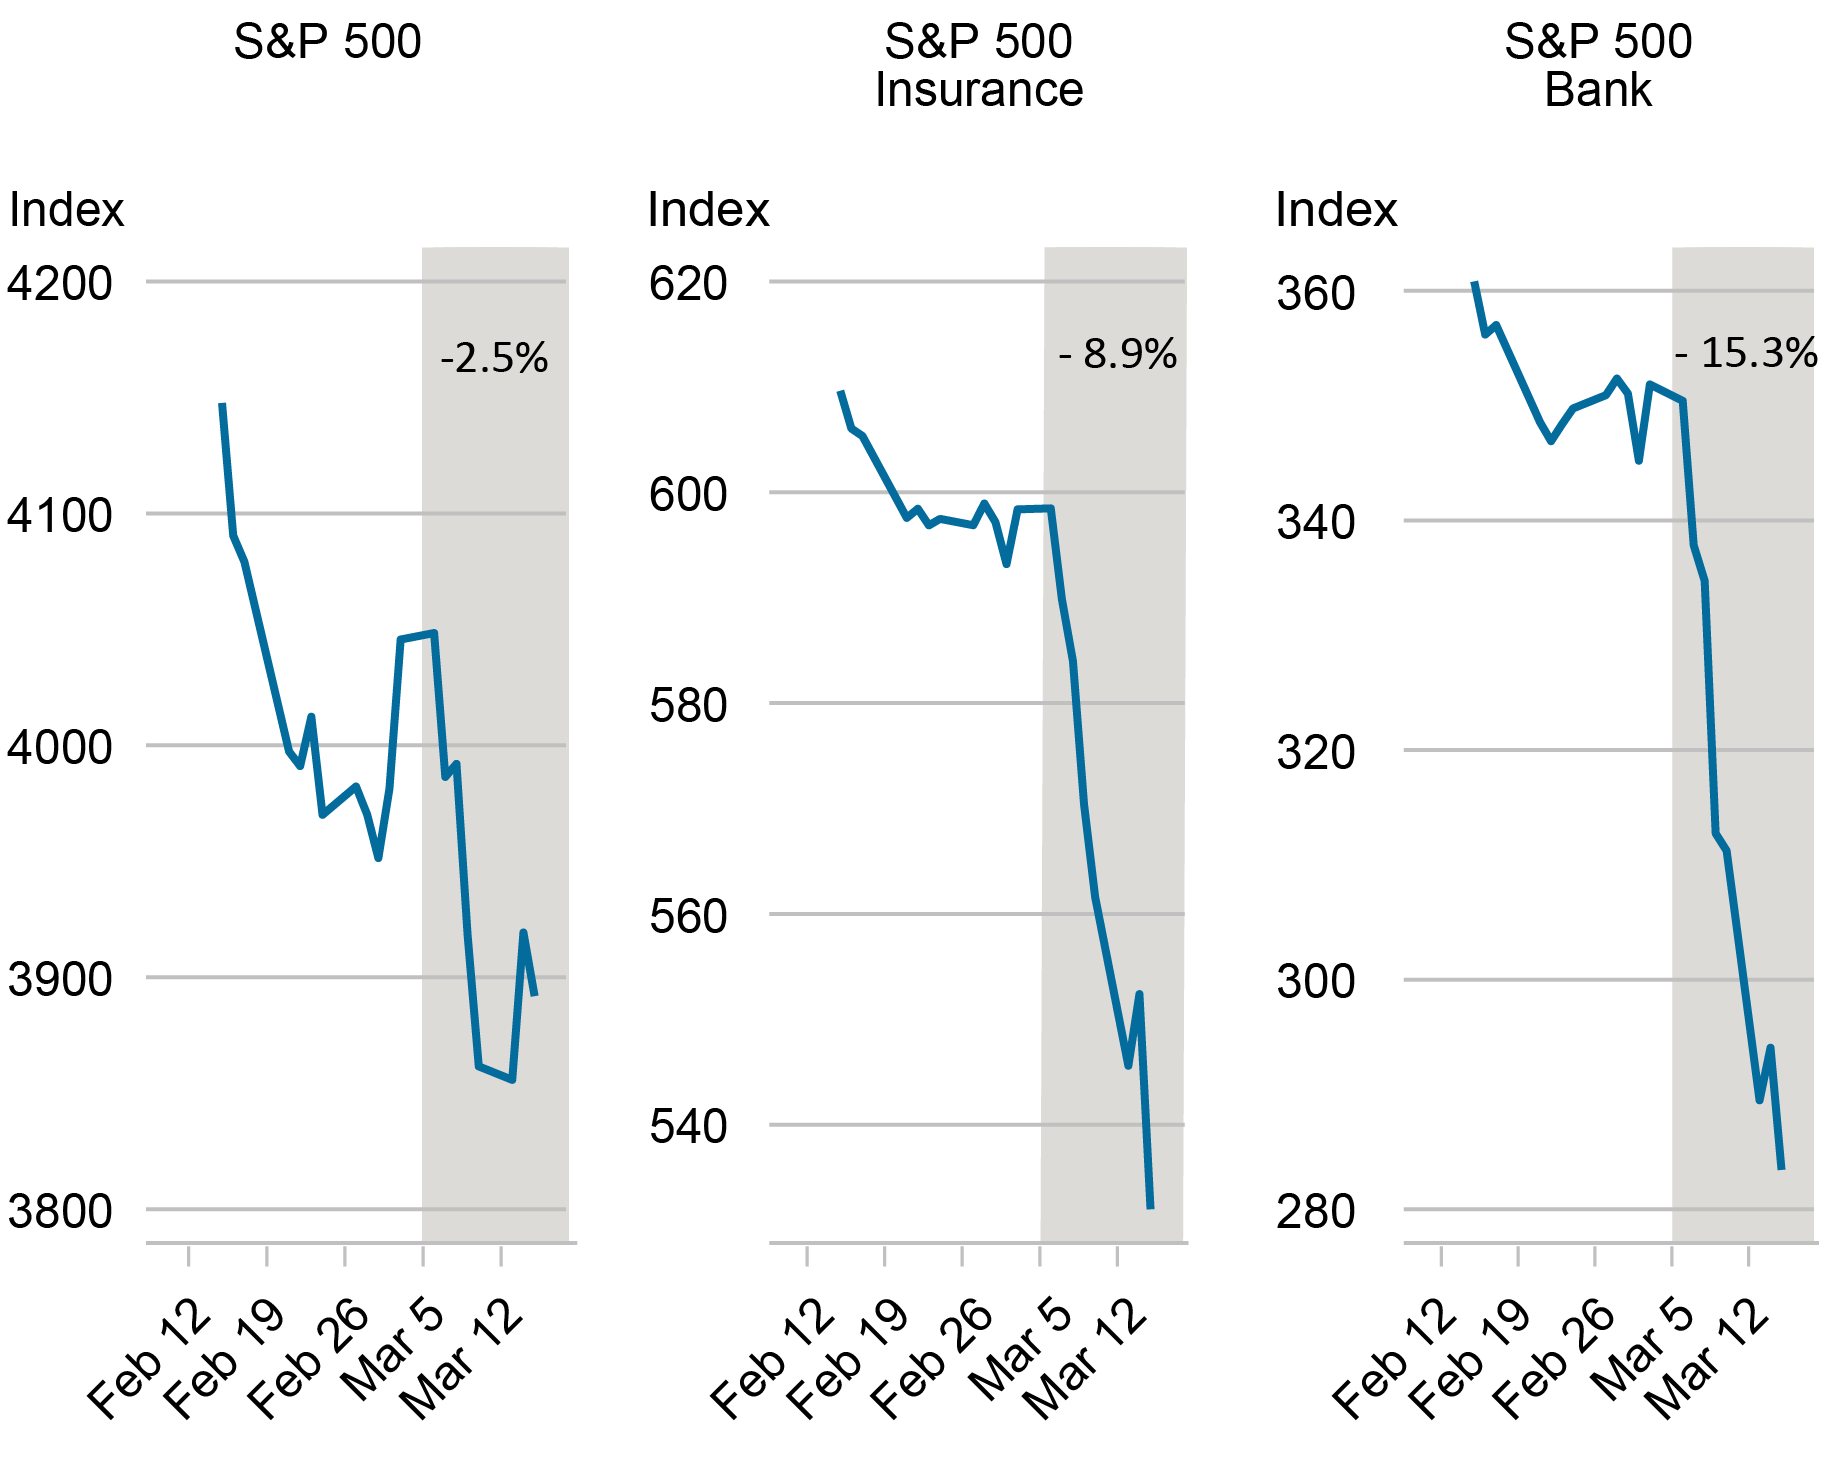 Three line charts tracking the S&P 500 index, S&P 500 Insurance index, and S&P 500 Bank index from February 15 to March 15; these indexes dropped 2.5%, 8.9%, and 15.3% respectively the week following the Silicon Valley Bank collapse”